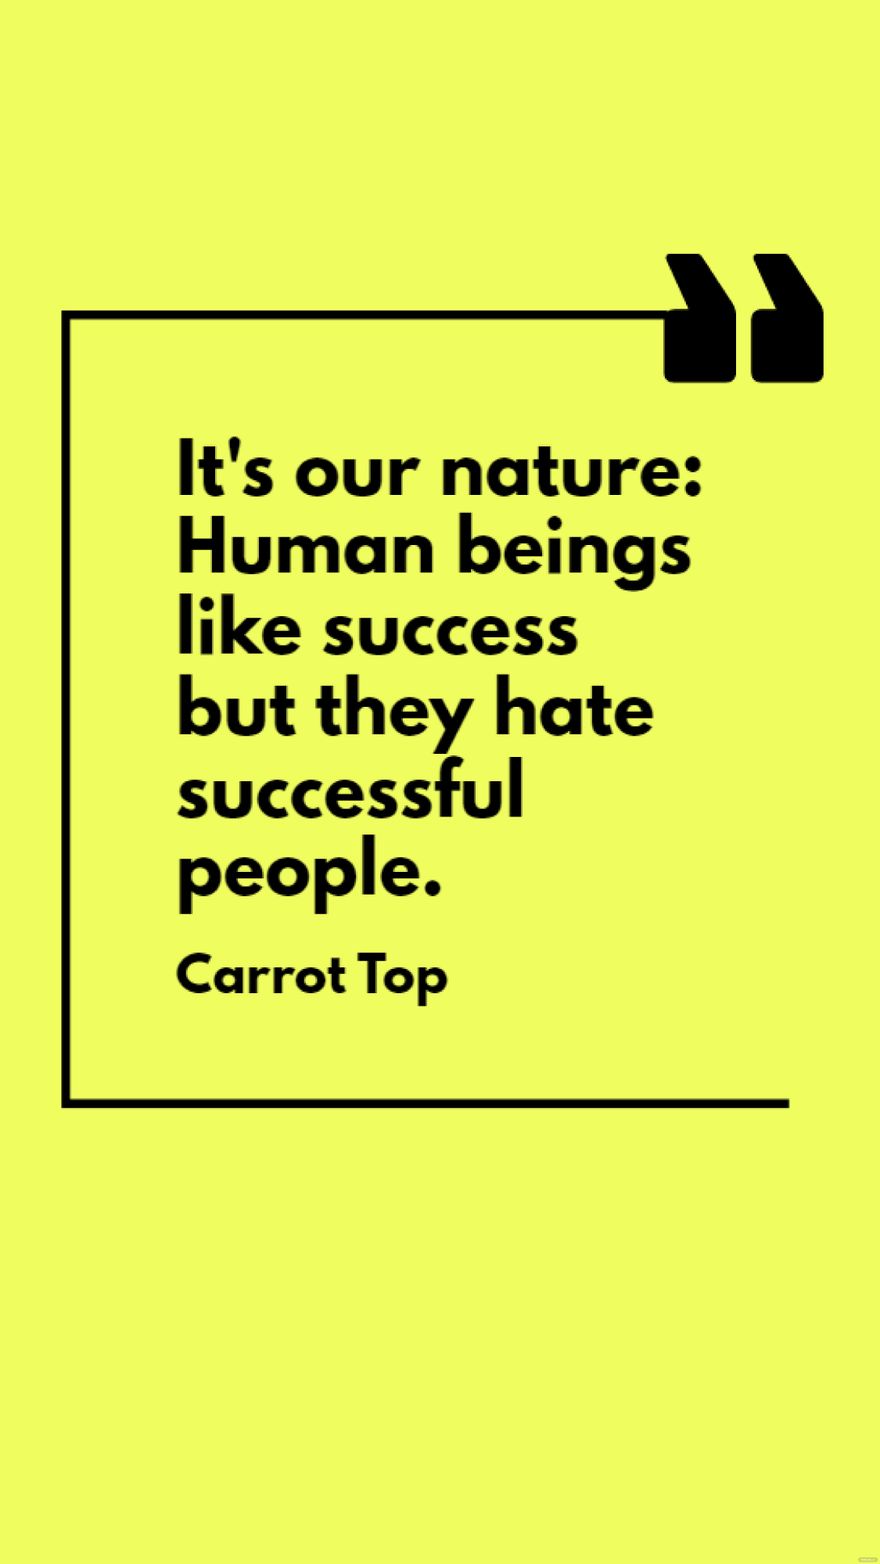 Free Carrot Top - It's our nature: Human beings like success but they hate successful people. in JPG